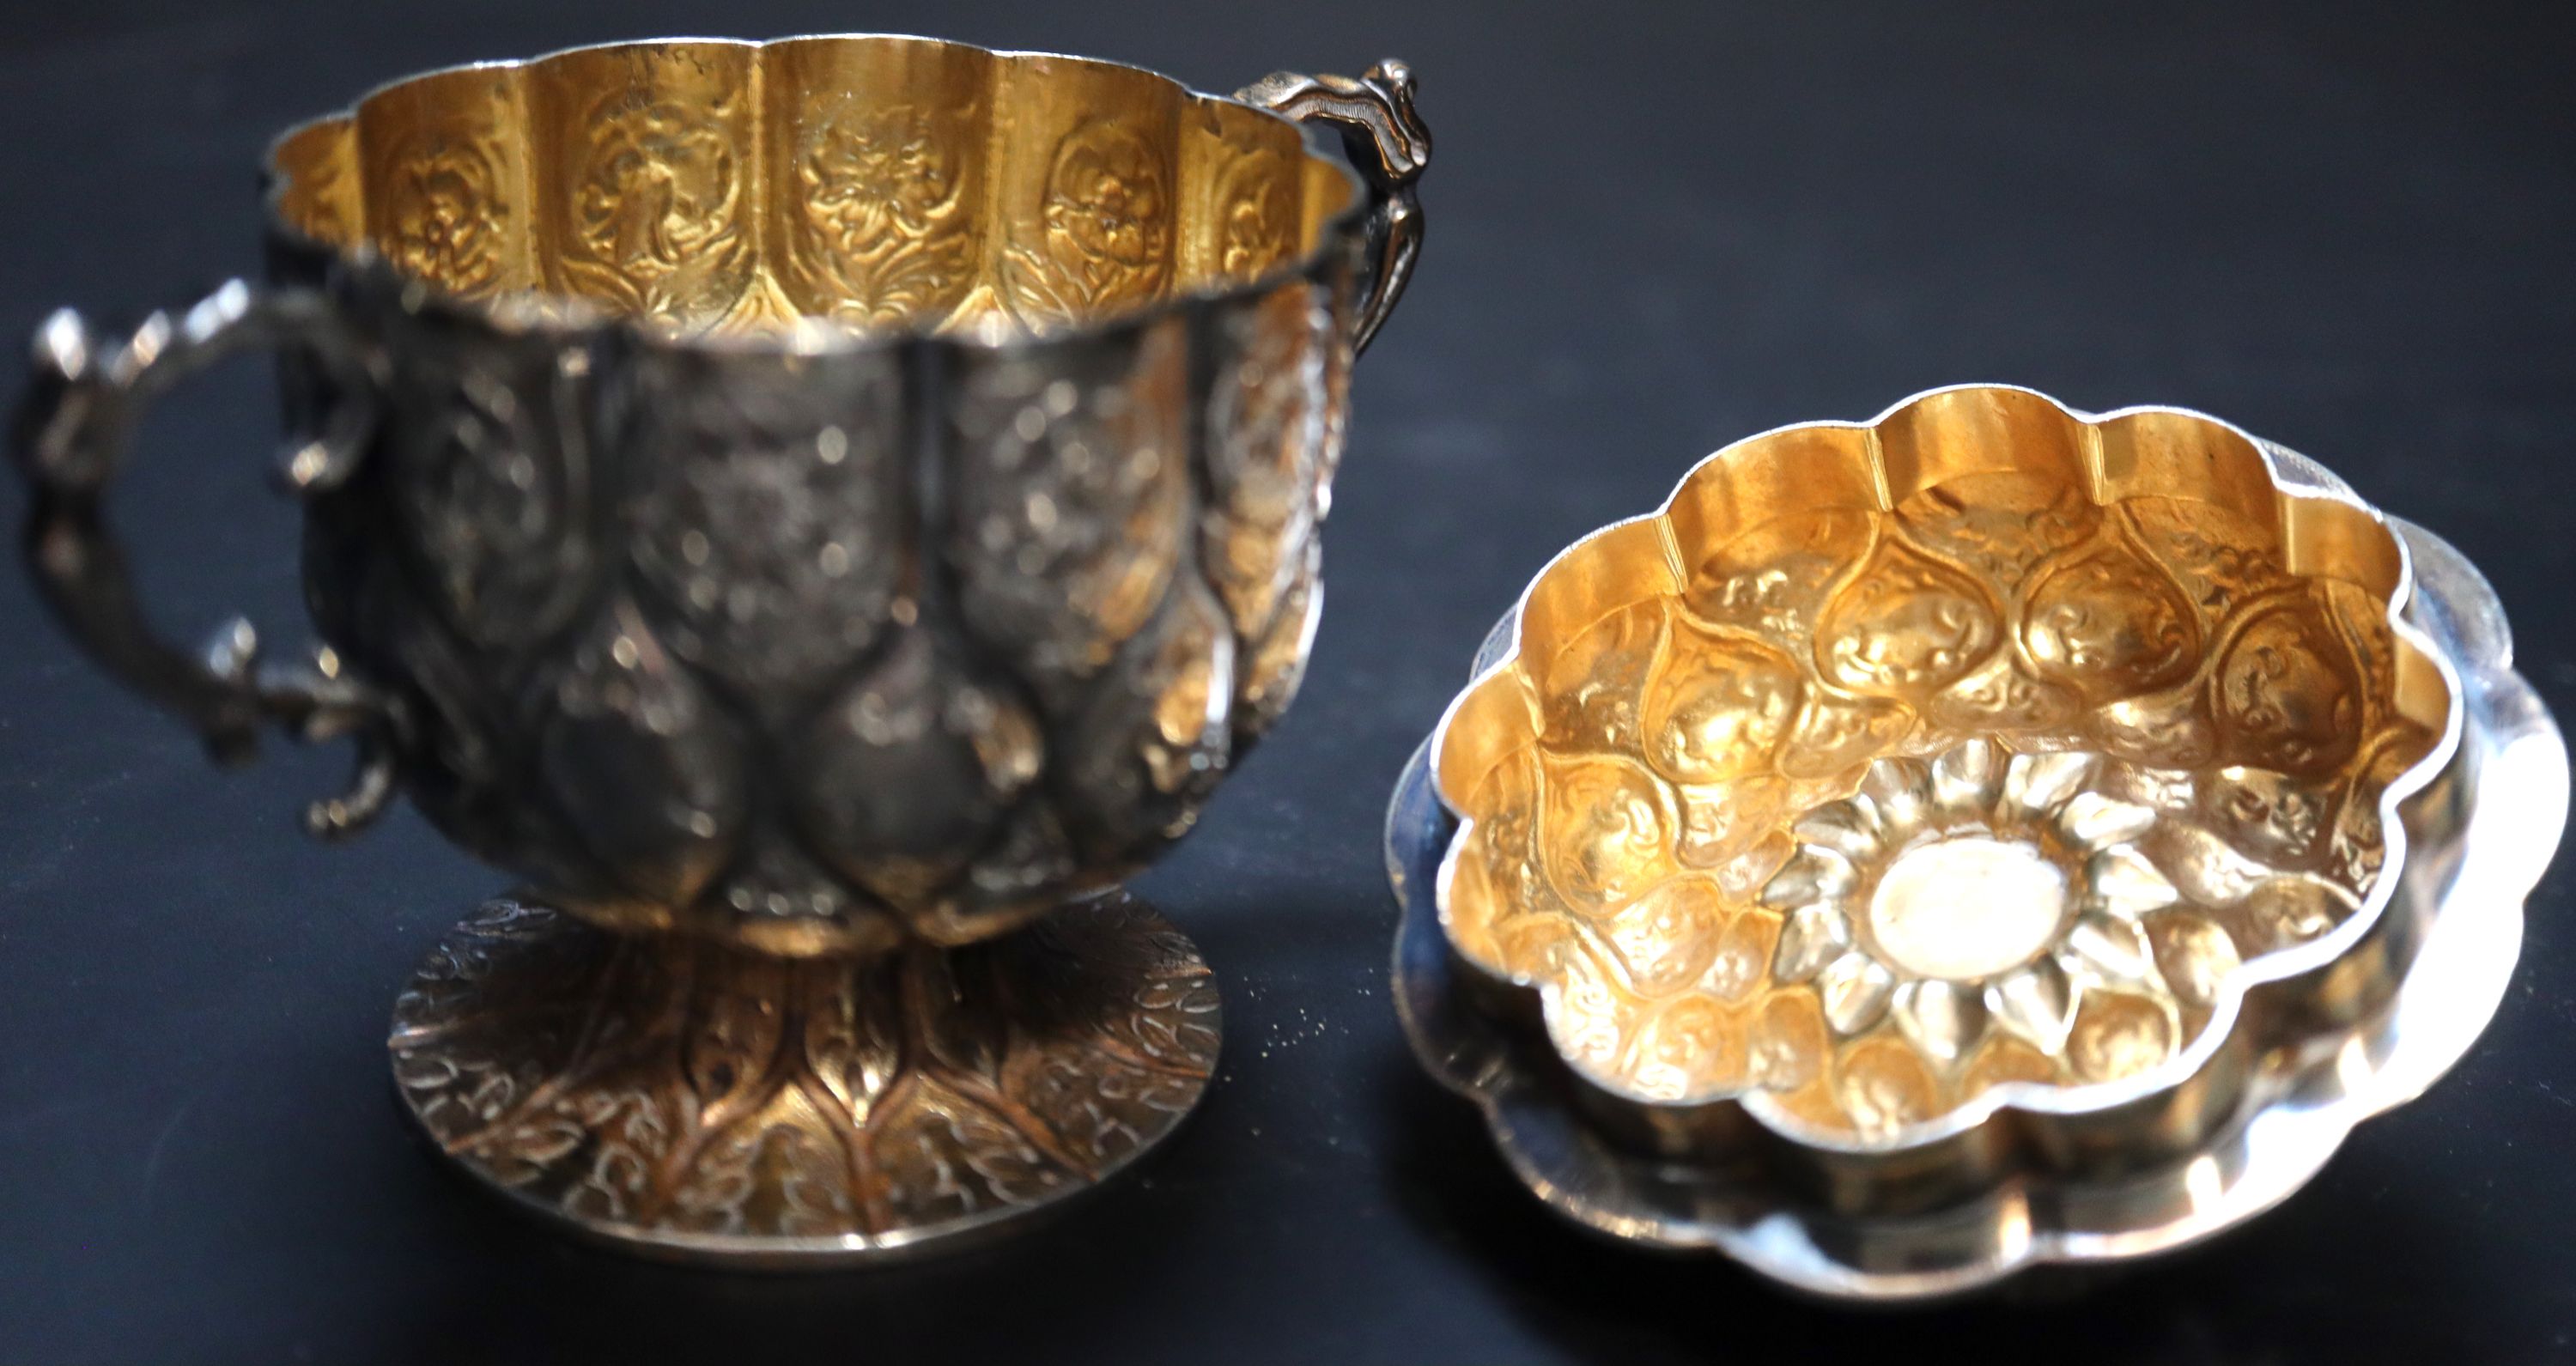 A George V 17th century style small silver two handled cup and cover, Goldsmiths & Silversmiths Co Ltd, London, 1924,